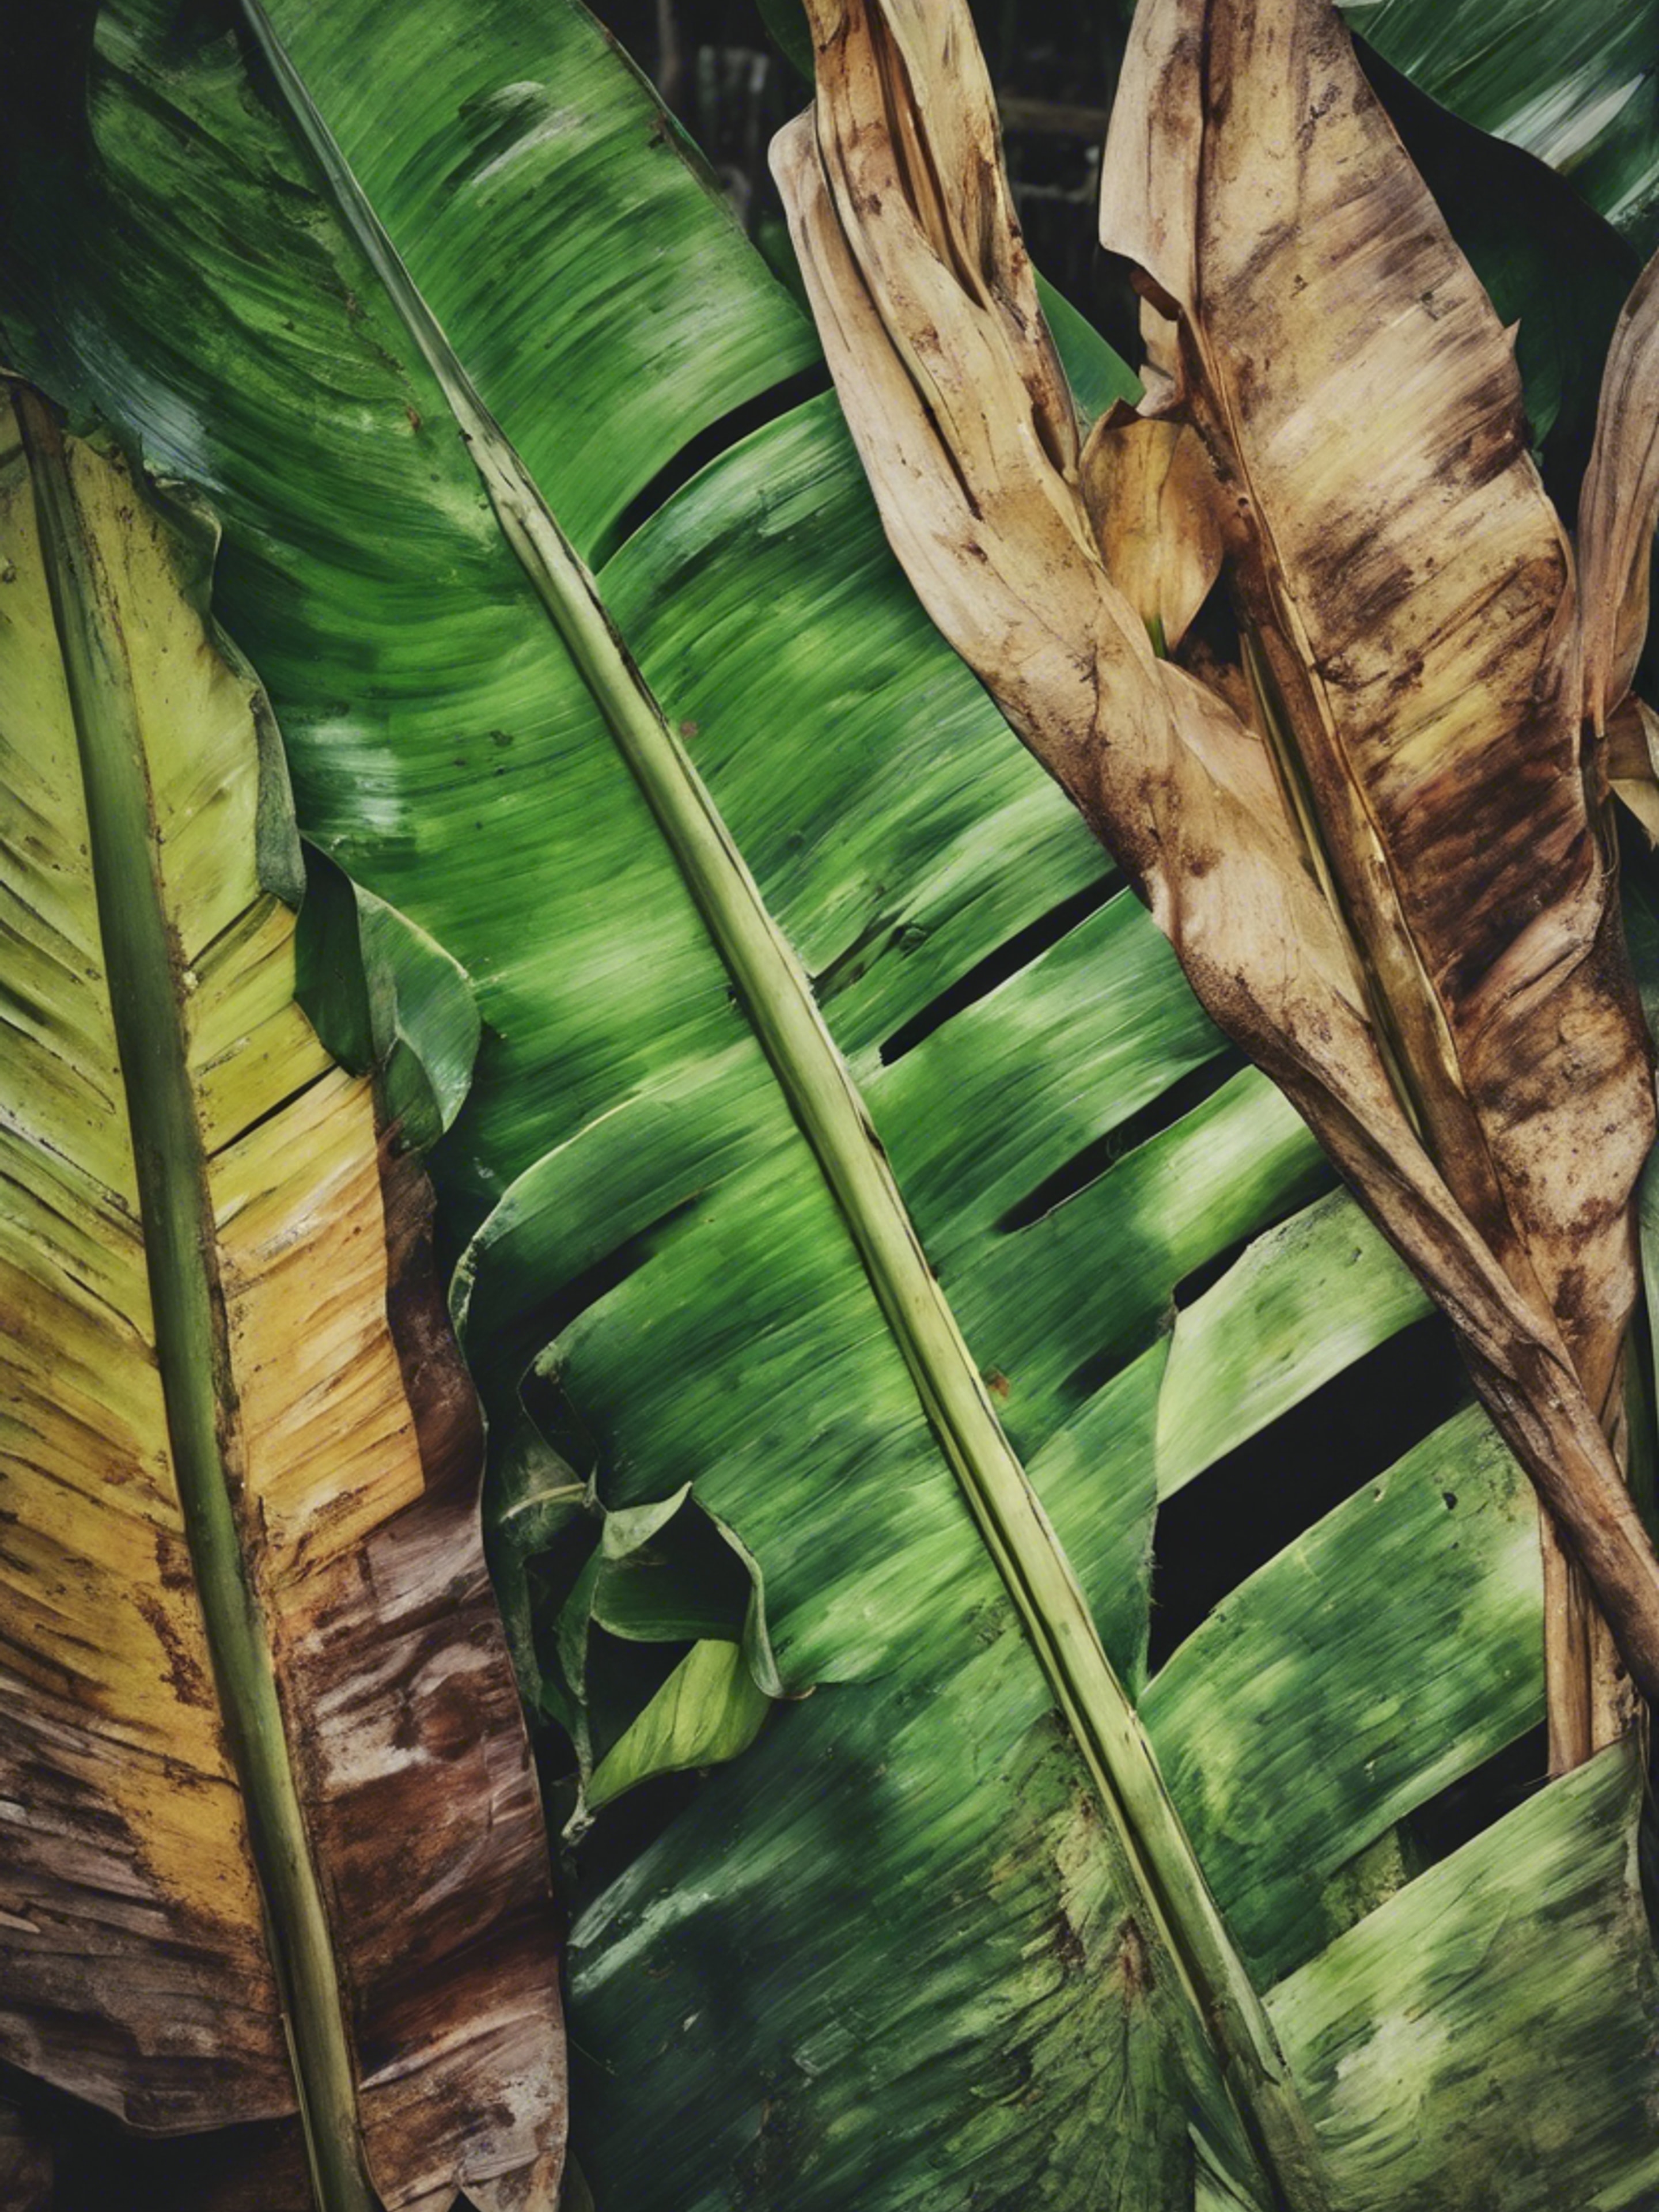 A textured painting of banana leaves in varying stages of life and decay. Ταπετσαρία[272dba85425e4d608ad5]